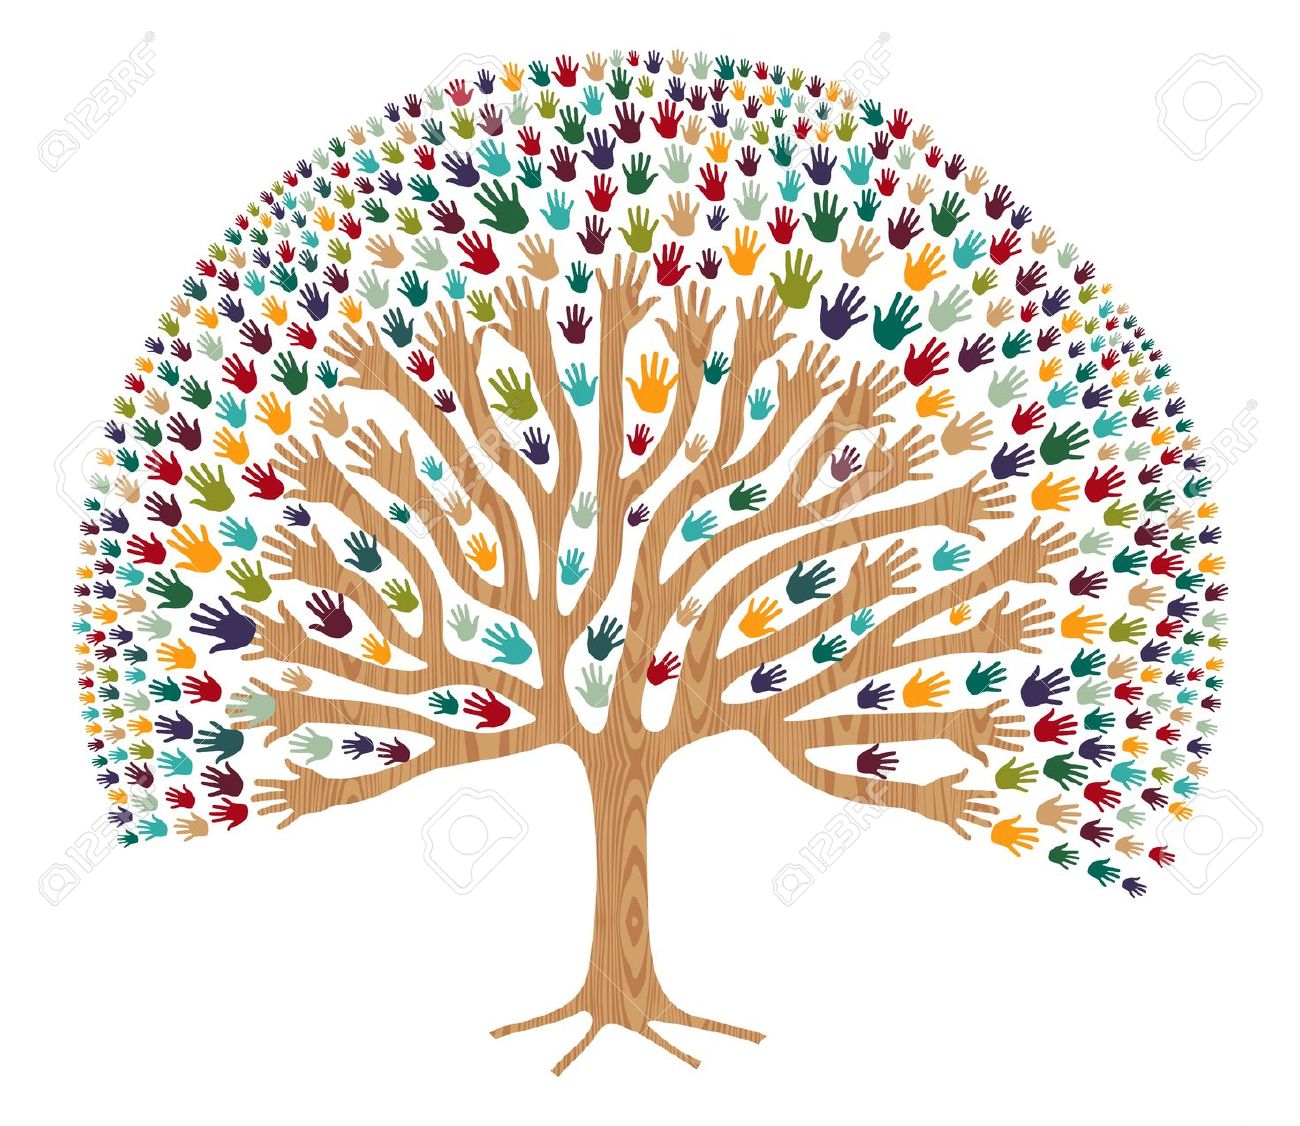 16105637-Isolated-diversity-tree-hands-illustration-for-greeting-card-file-layered-for-easy-manipulation-and--Stock-Vector.jpg